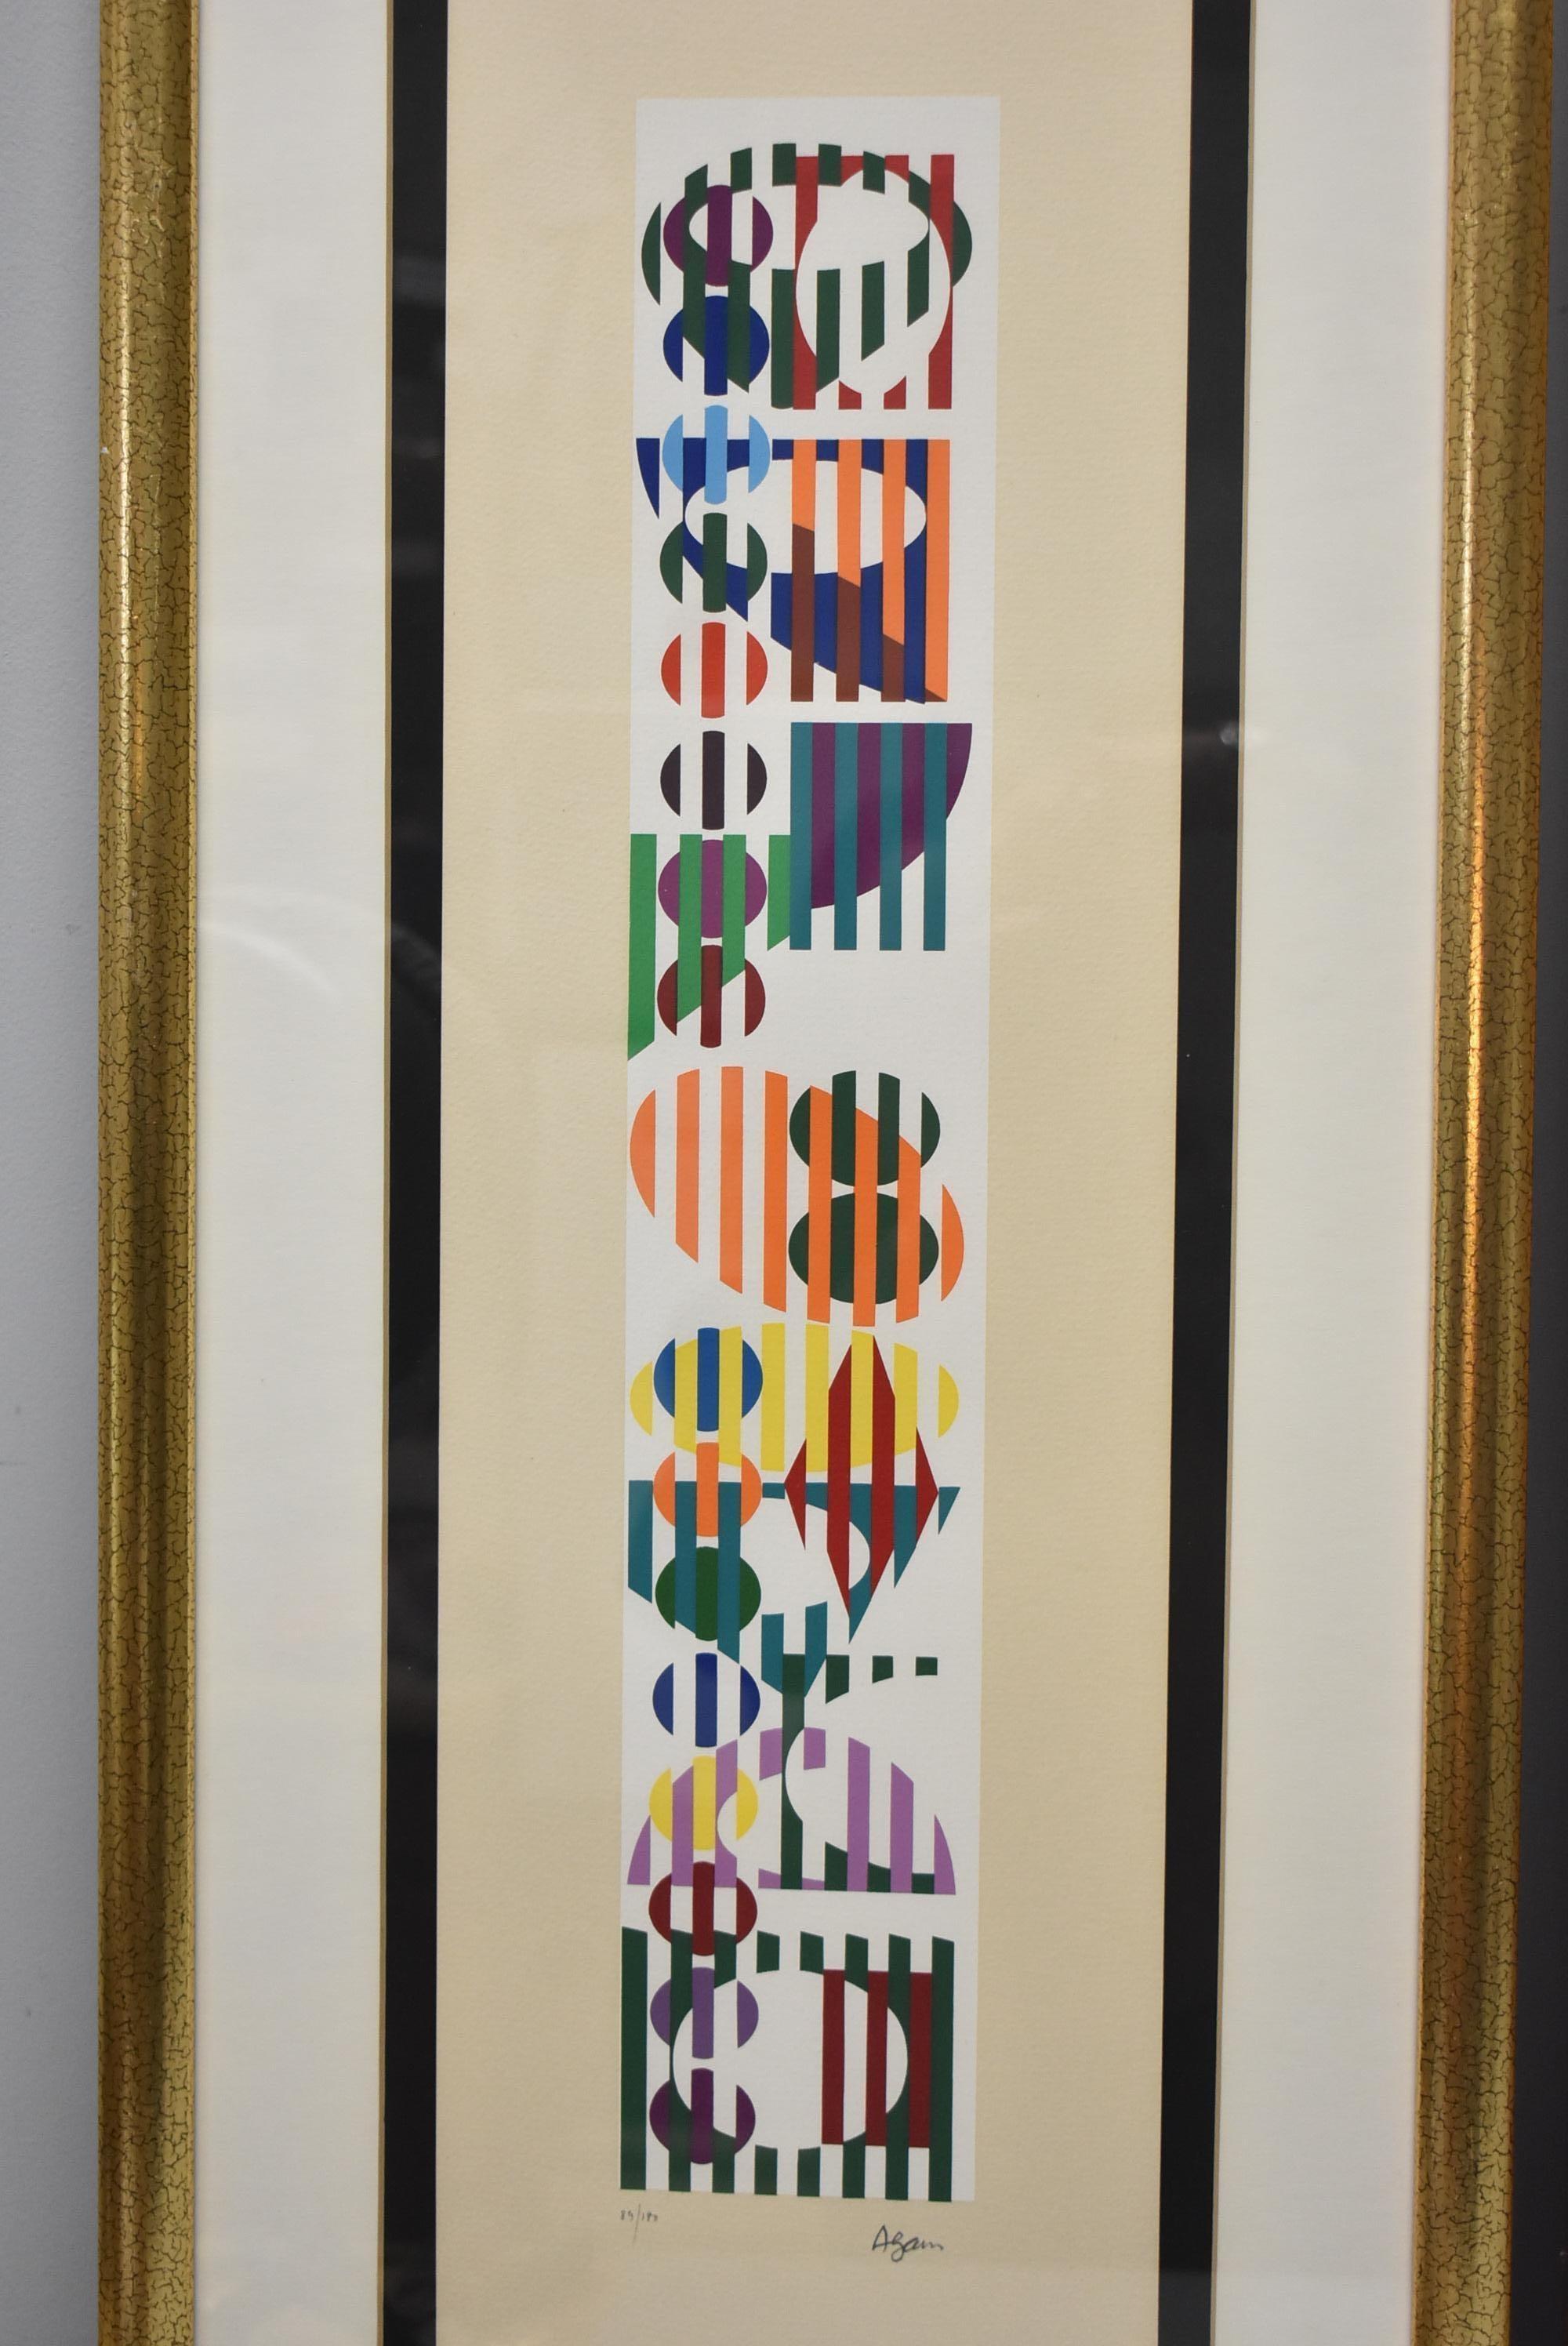 Four limited edition by Yaacov Agam all signed and numbered 89 / 180. Overall framed size is 13